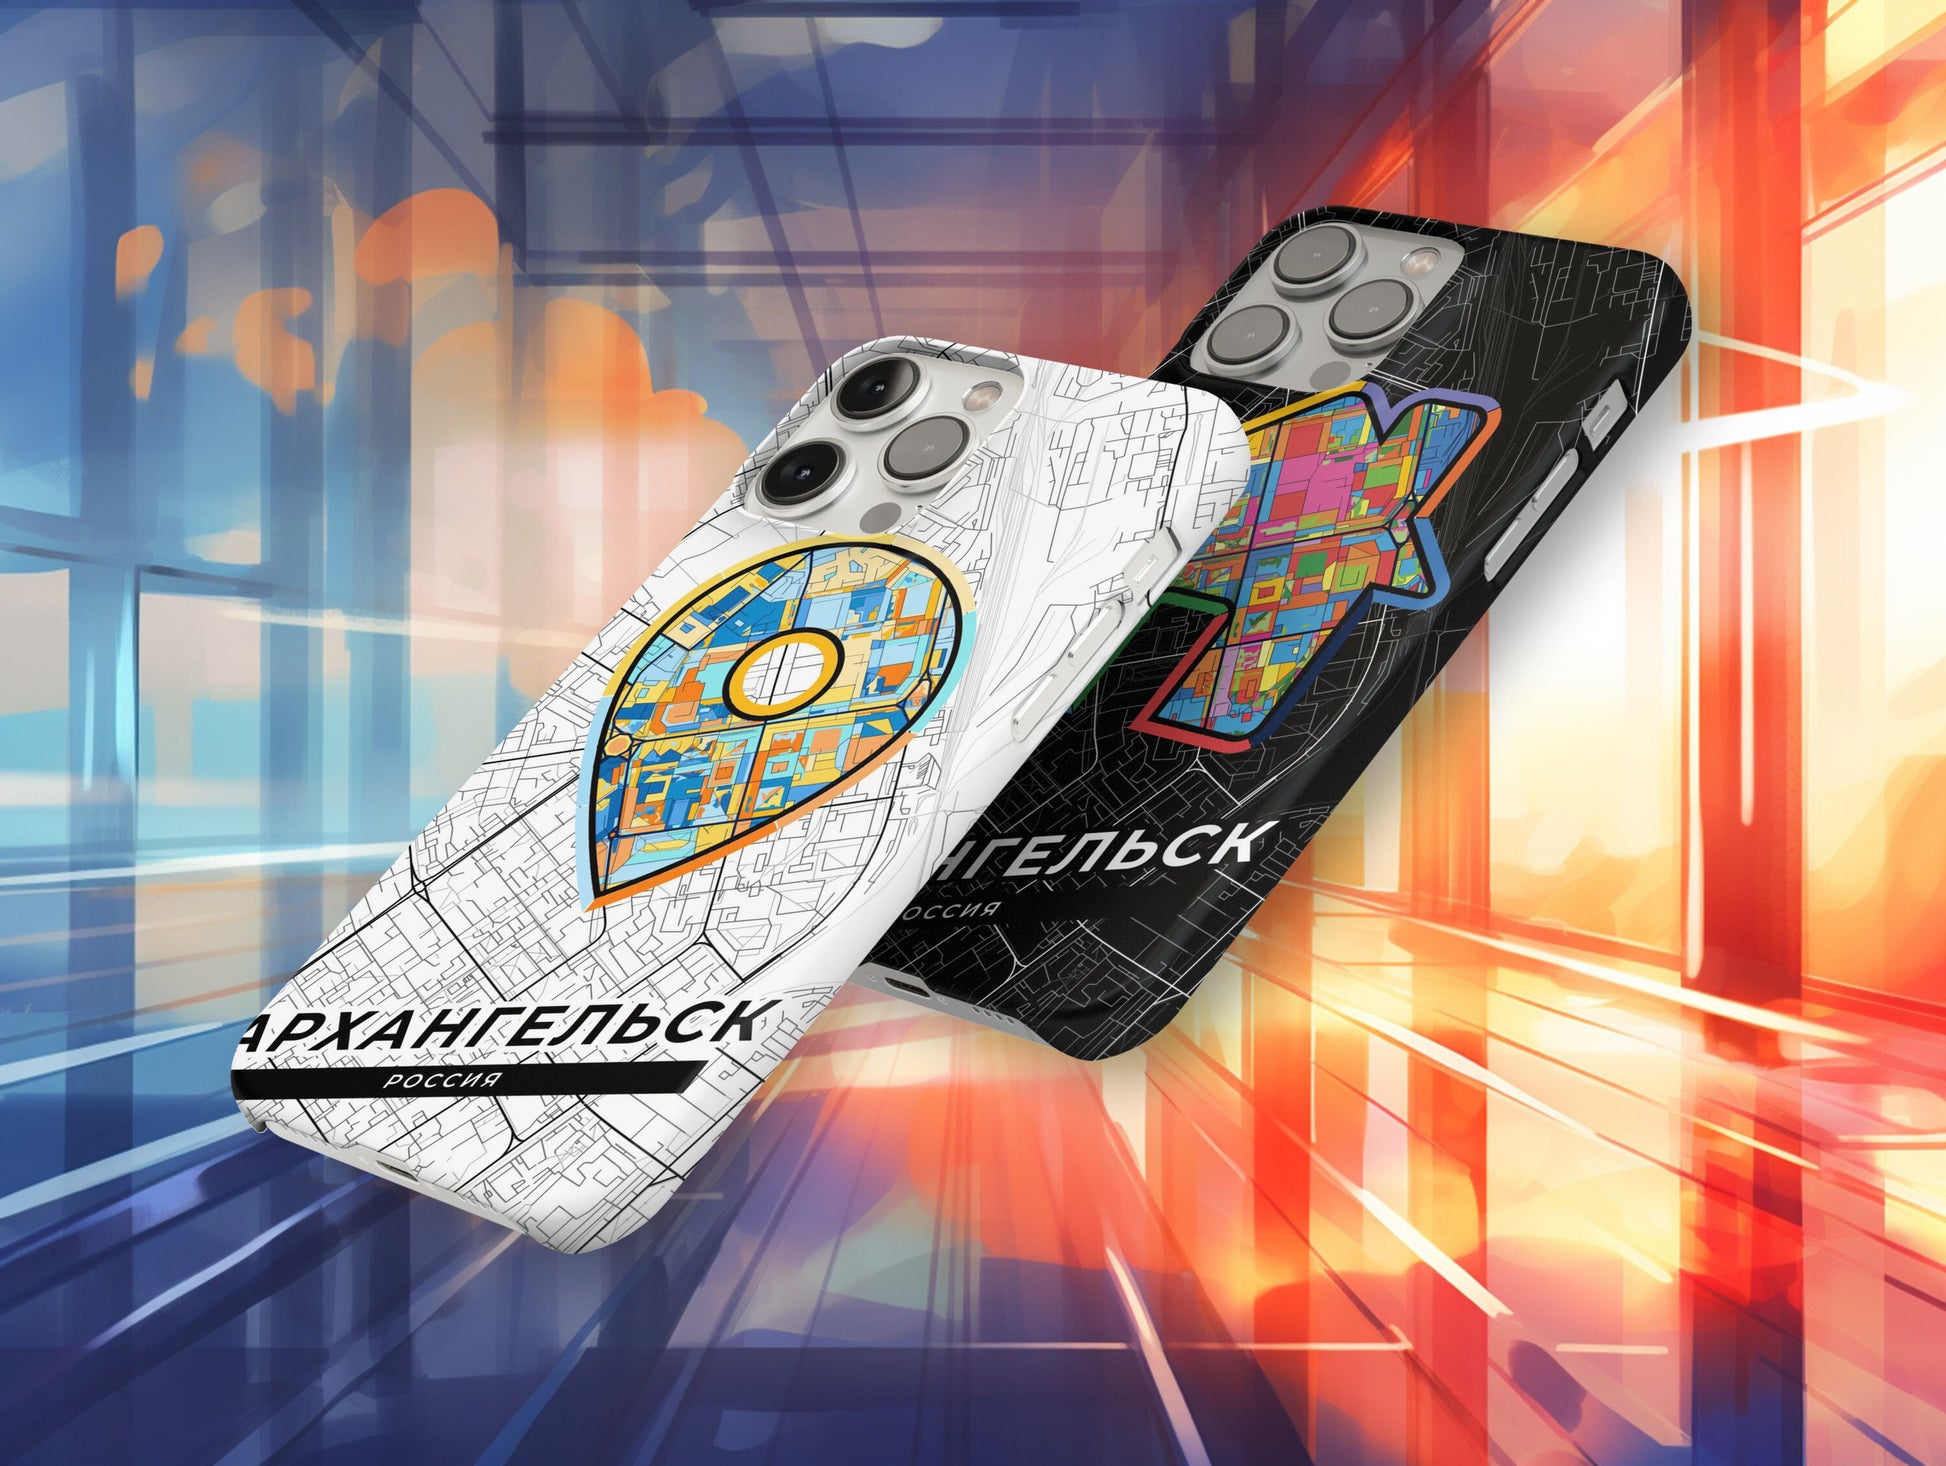 Arkhangelsk Russia slim phone case with colorful icon. Birthday, wedding or housewarming gift. Couple match cases.